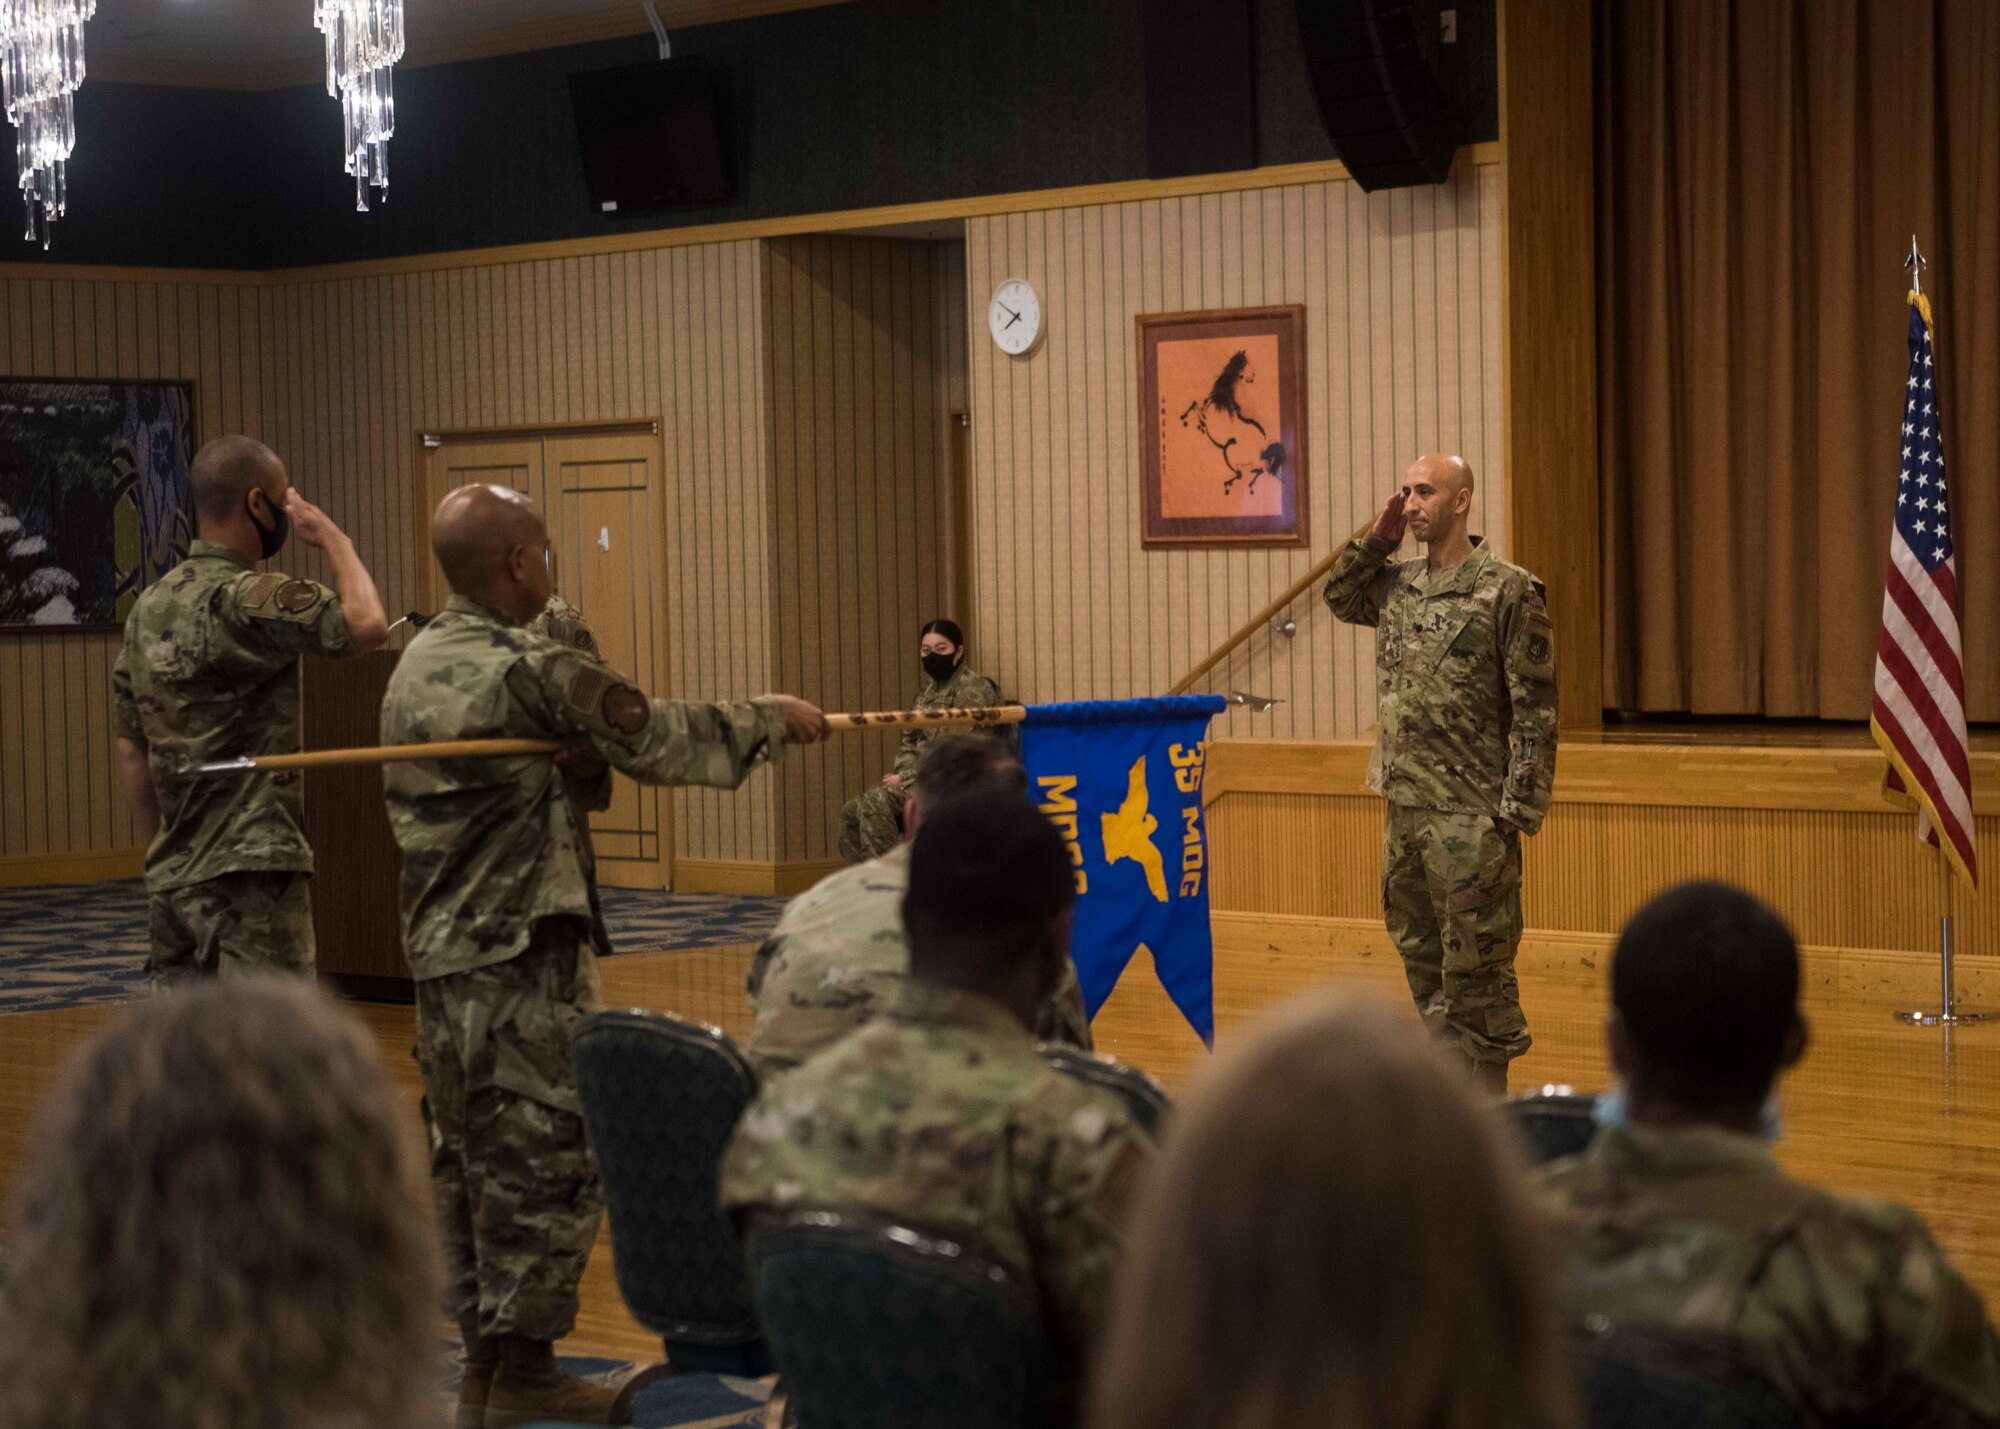 A service member on the right renders a salute to another service member and a guidon bearer while audience members watch.